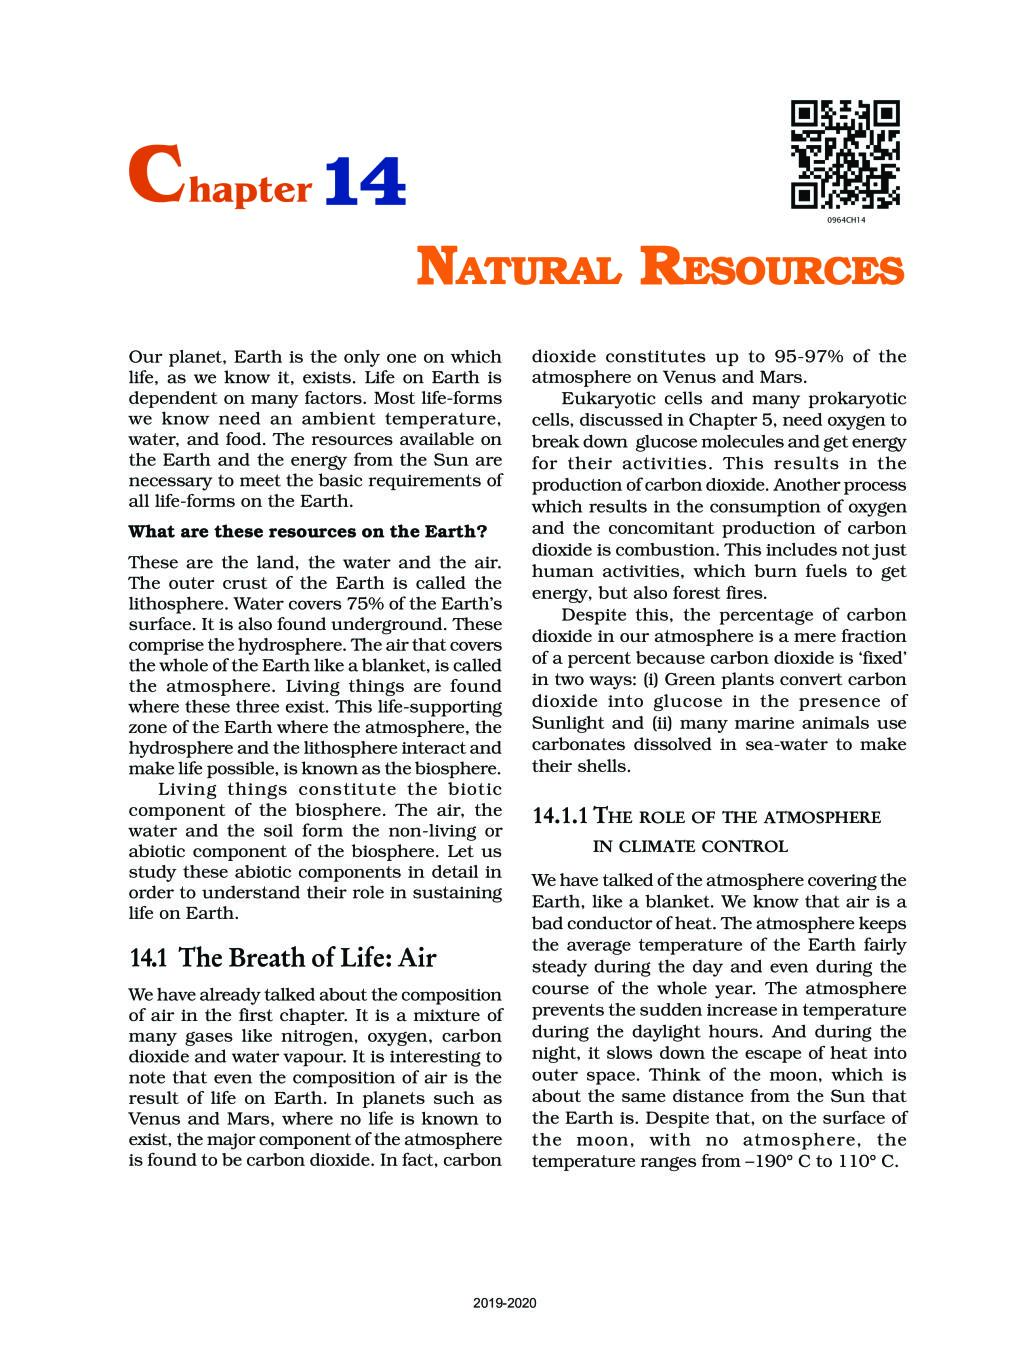 NCERT Book Class 9 Science Chapter 14 Natural resources - Page 1